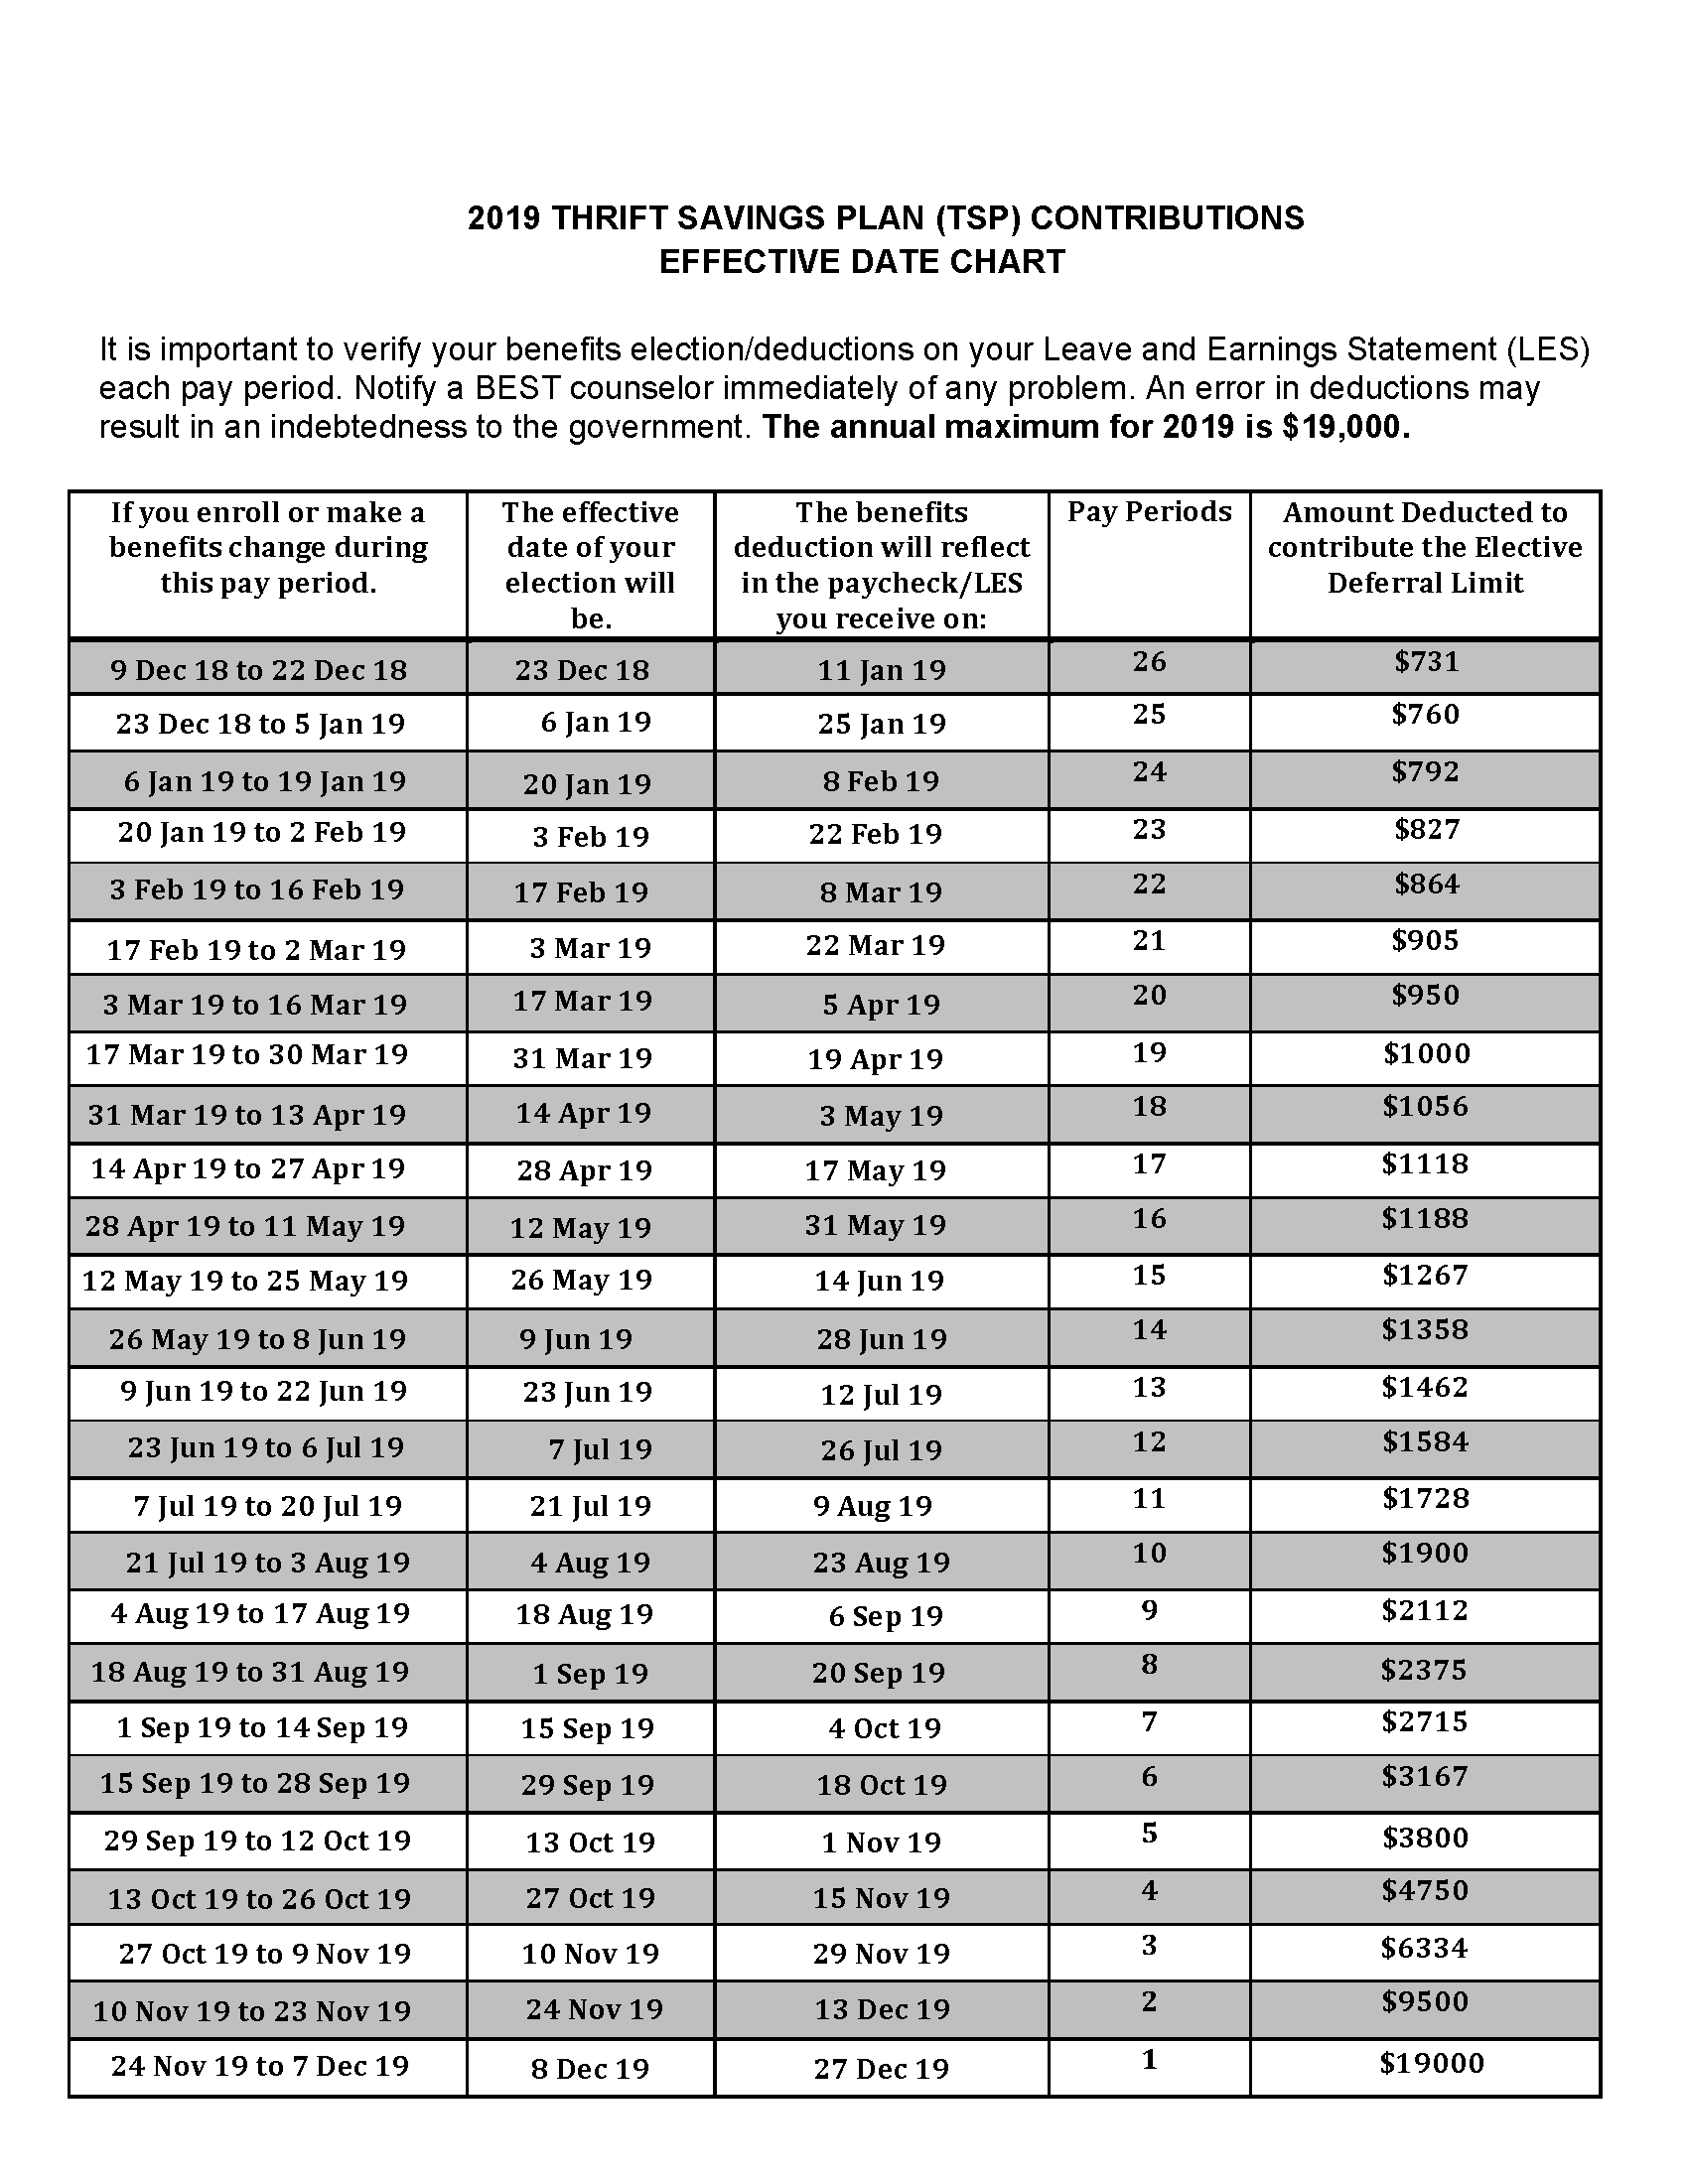 2019 Tsp Contributions And Effective Date Chart : Usps  Usps Pay Chart